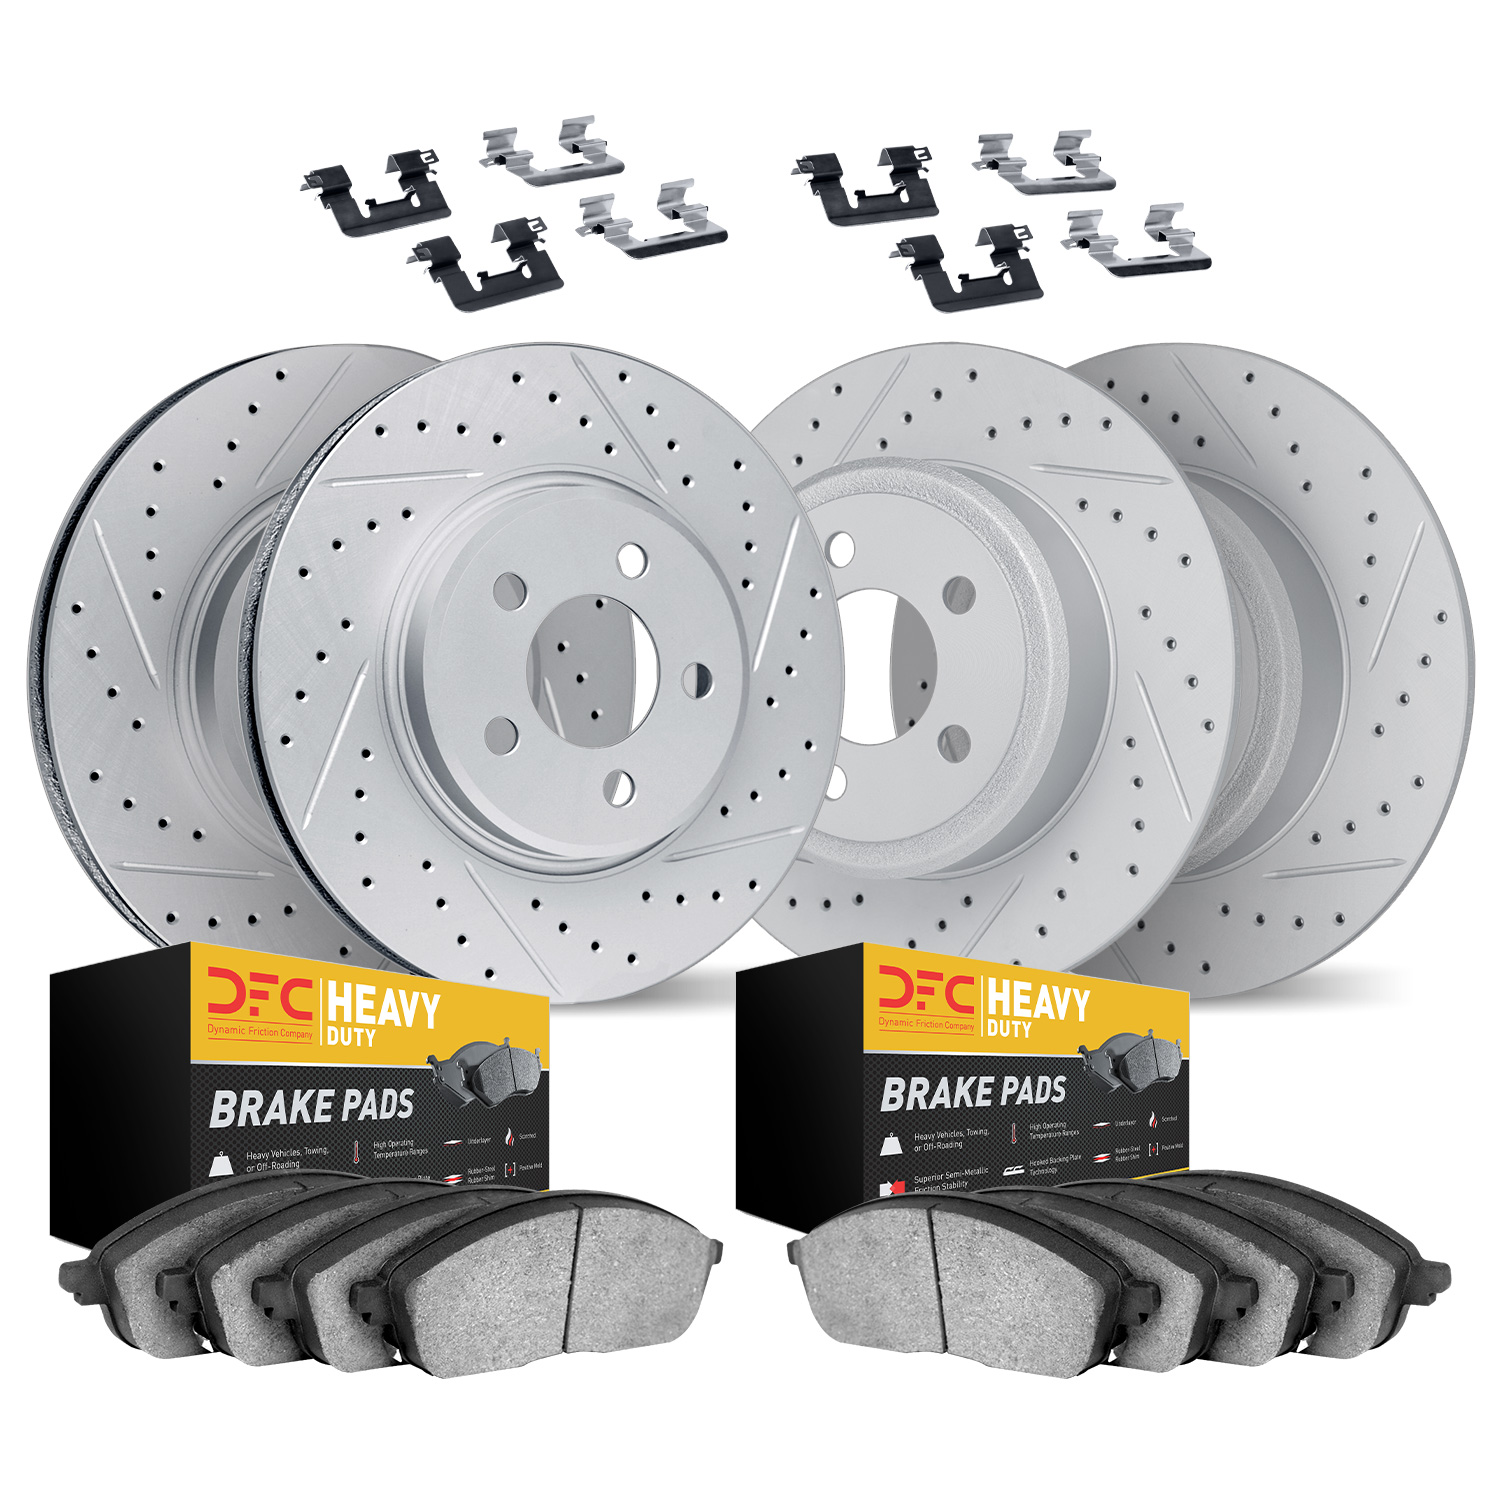 2214-42027 Geoperformance Drilled/Slotted Rotors w/Heavy-Duty Pads Kit & Hardware, 1993-1998 Mopar, Position: Front and Rear